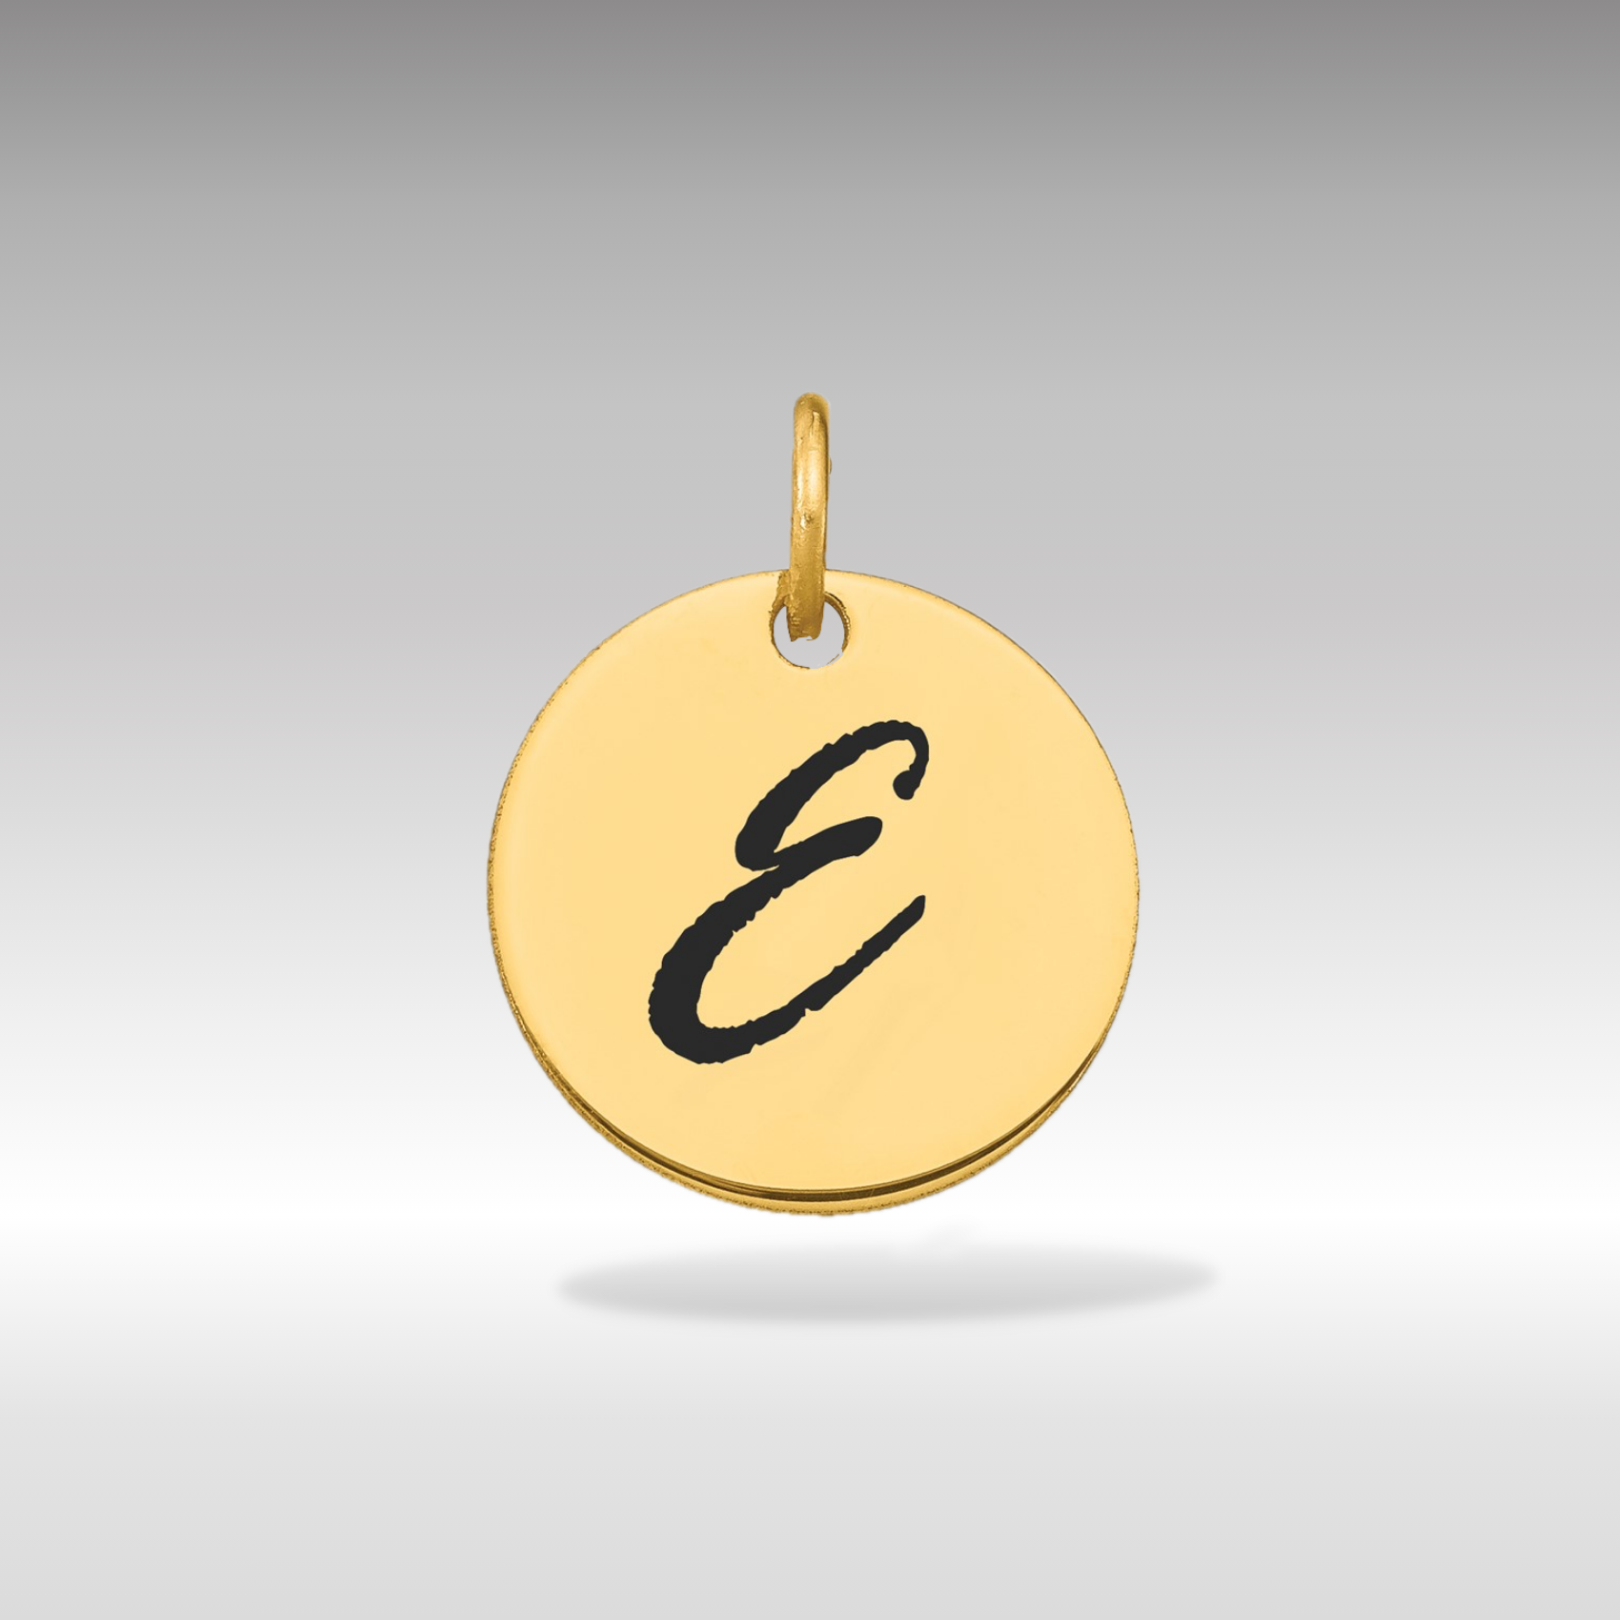 14K Gold Script Letter 'E' Circular Charm with Black Enamel - Charlie & Co. Jewelry